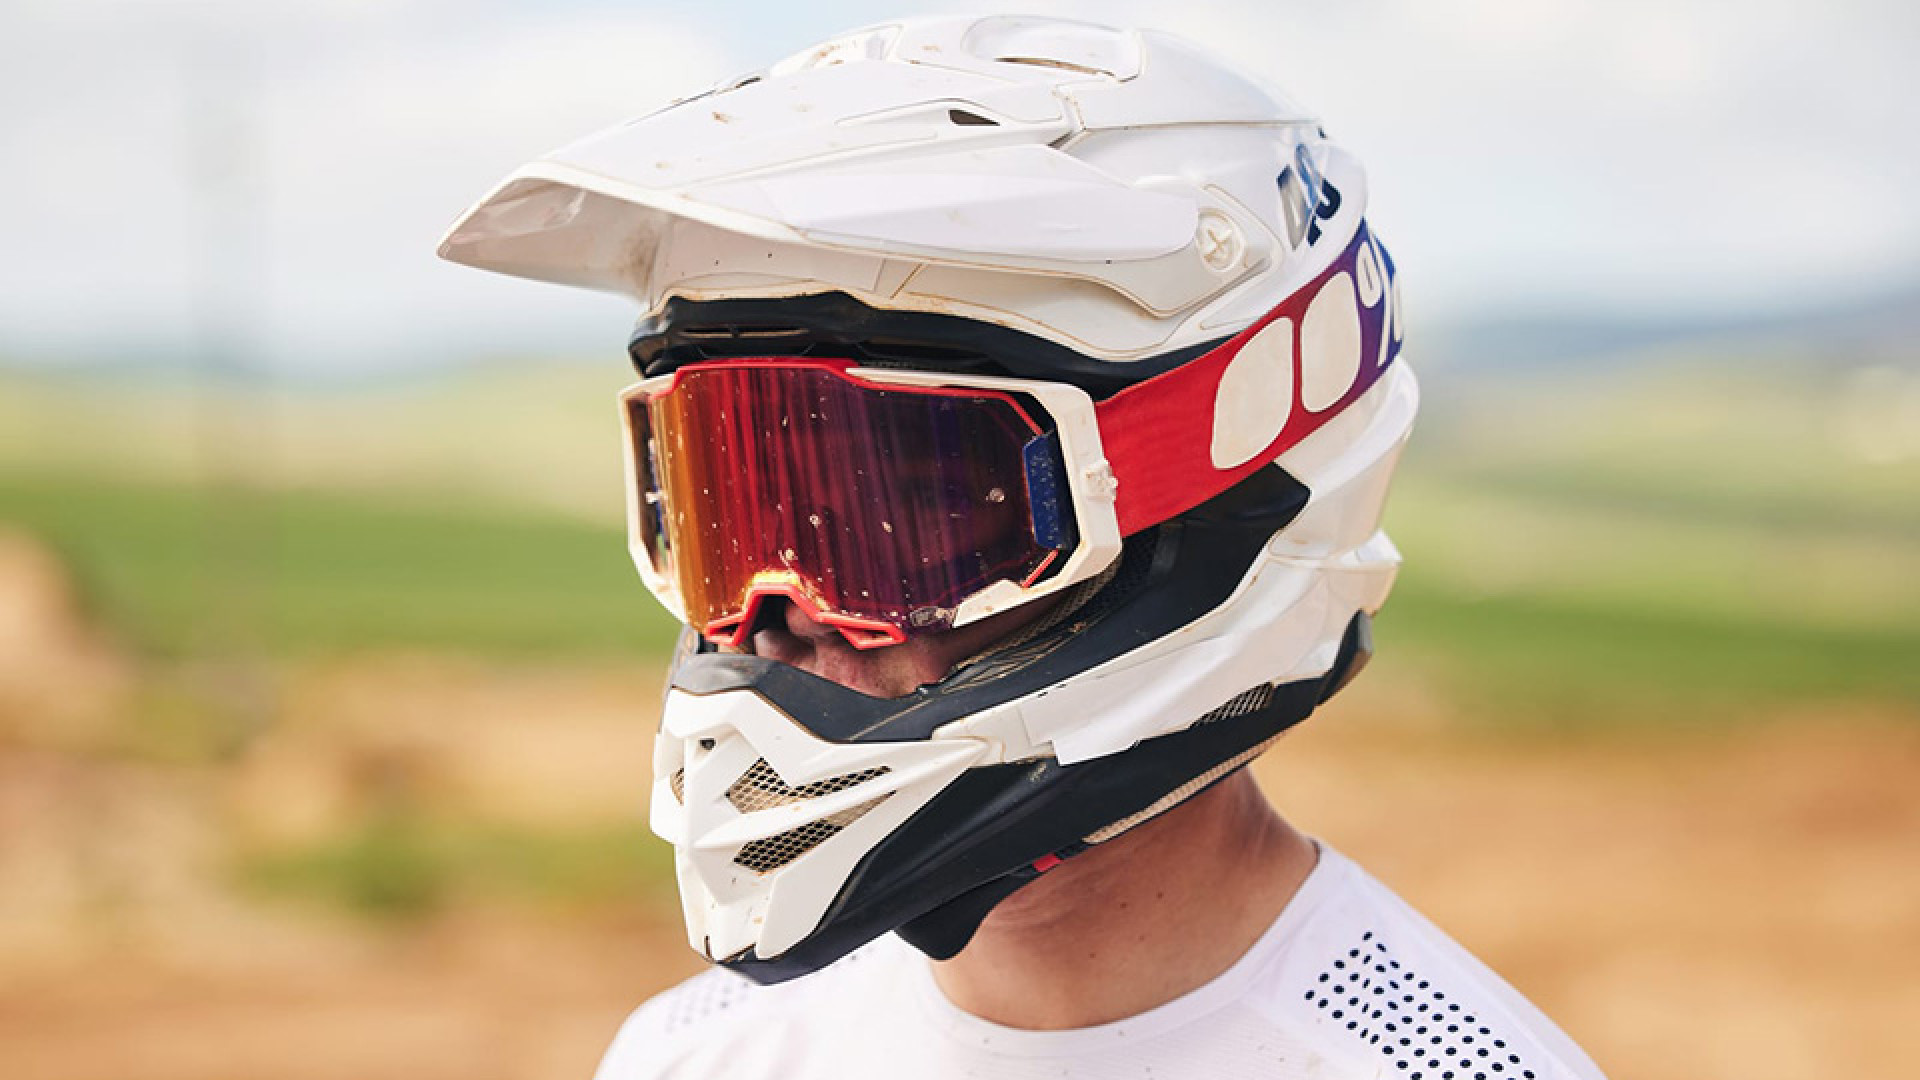 https://www.raceleathers.co.uk/image/cache/catalog/Blog%20Images/Difference%20Between%20Motorcycle%20Helmets%20and%20Motocross%20Helmets-1920x1080.jpg